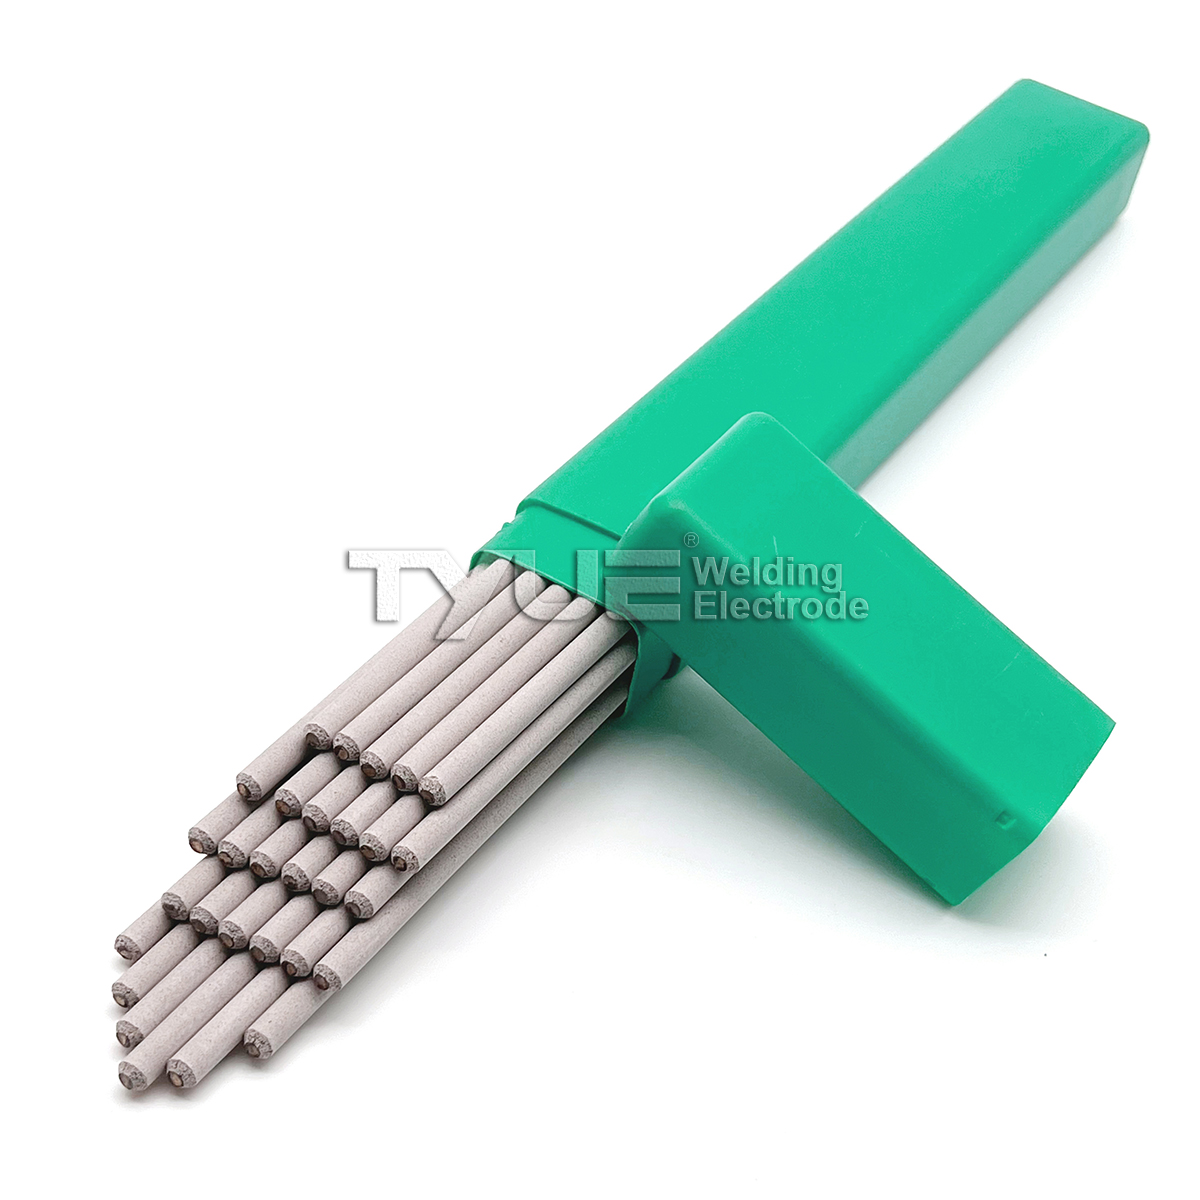 Ni327-6 Nickel Alloy Welding Electrodes AWS A5.11 ENiCrMo-6 Sandunan Welding, Welding Structural Arc Welding Stick Electrodes Featured Image